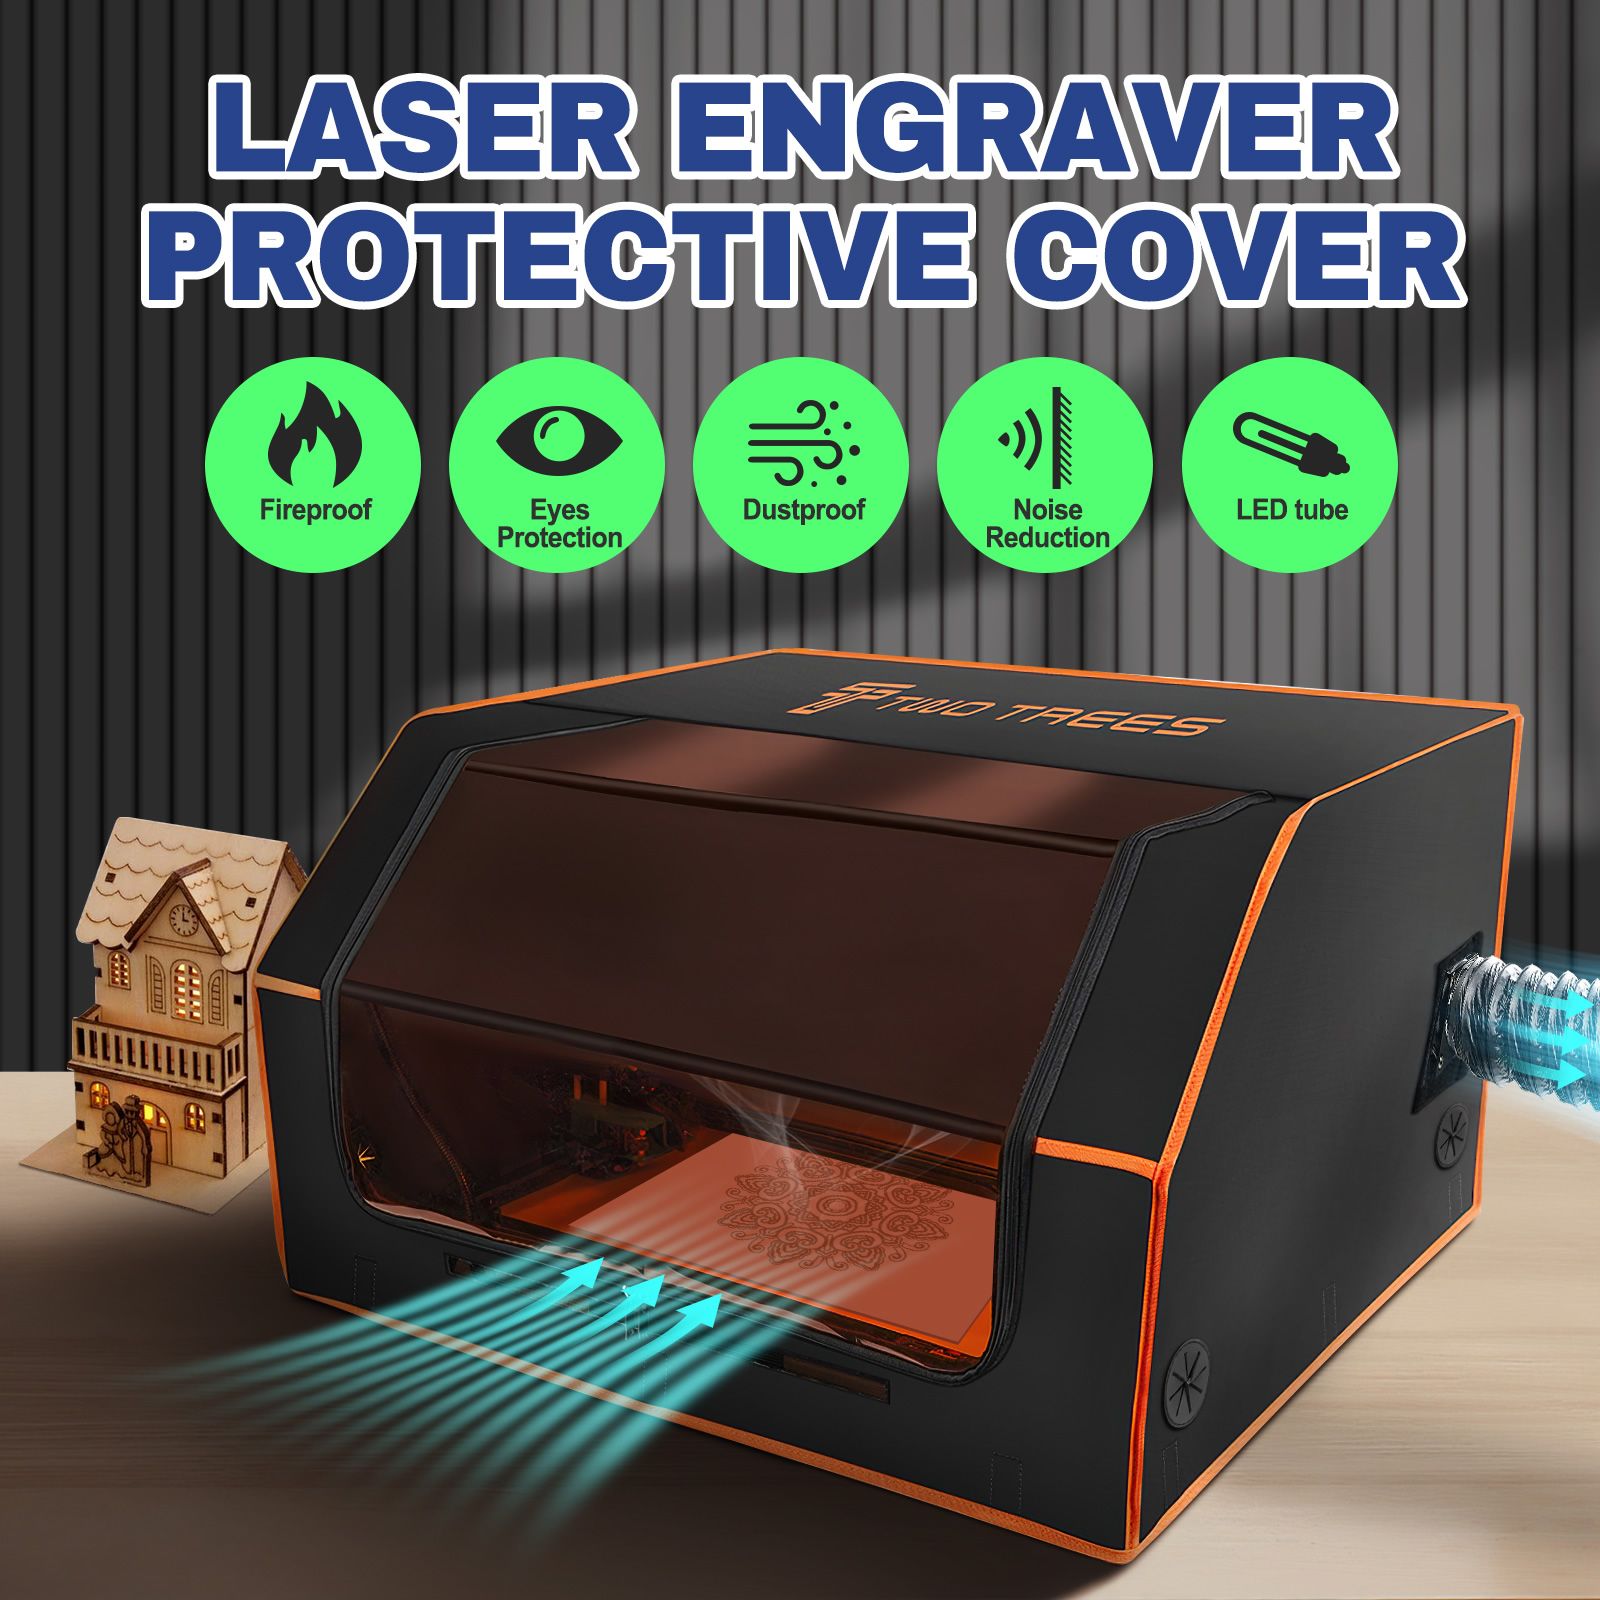 Best Deal for Creality Laser Engraver Enclosure, Fireproof and Dustproof